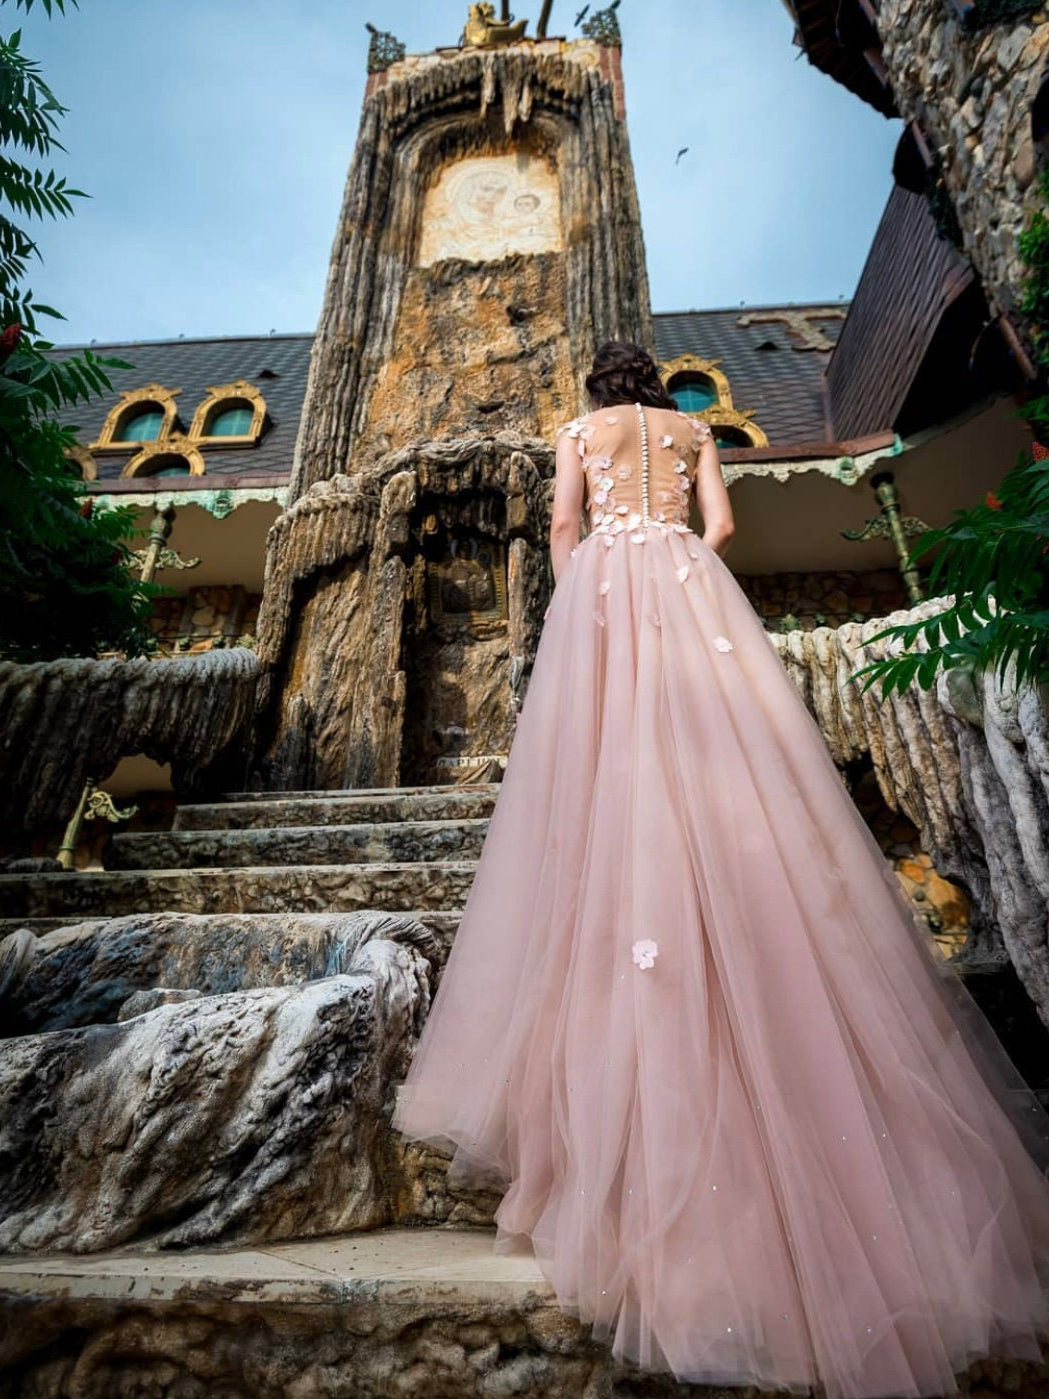 Fairytale Wedding: Floral Accented Bridal Gown in Reportage Style - AI Art  images — Vitalentum.net